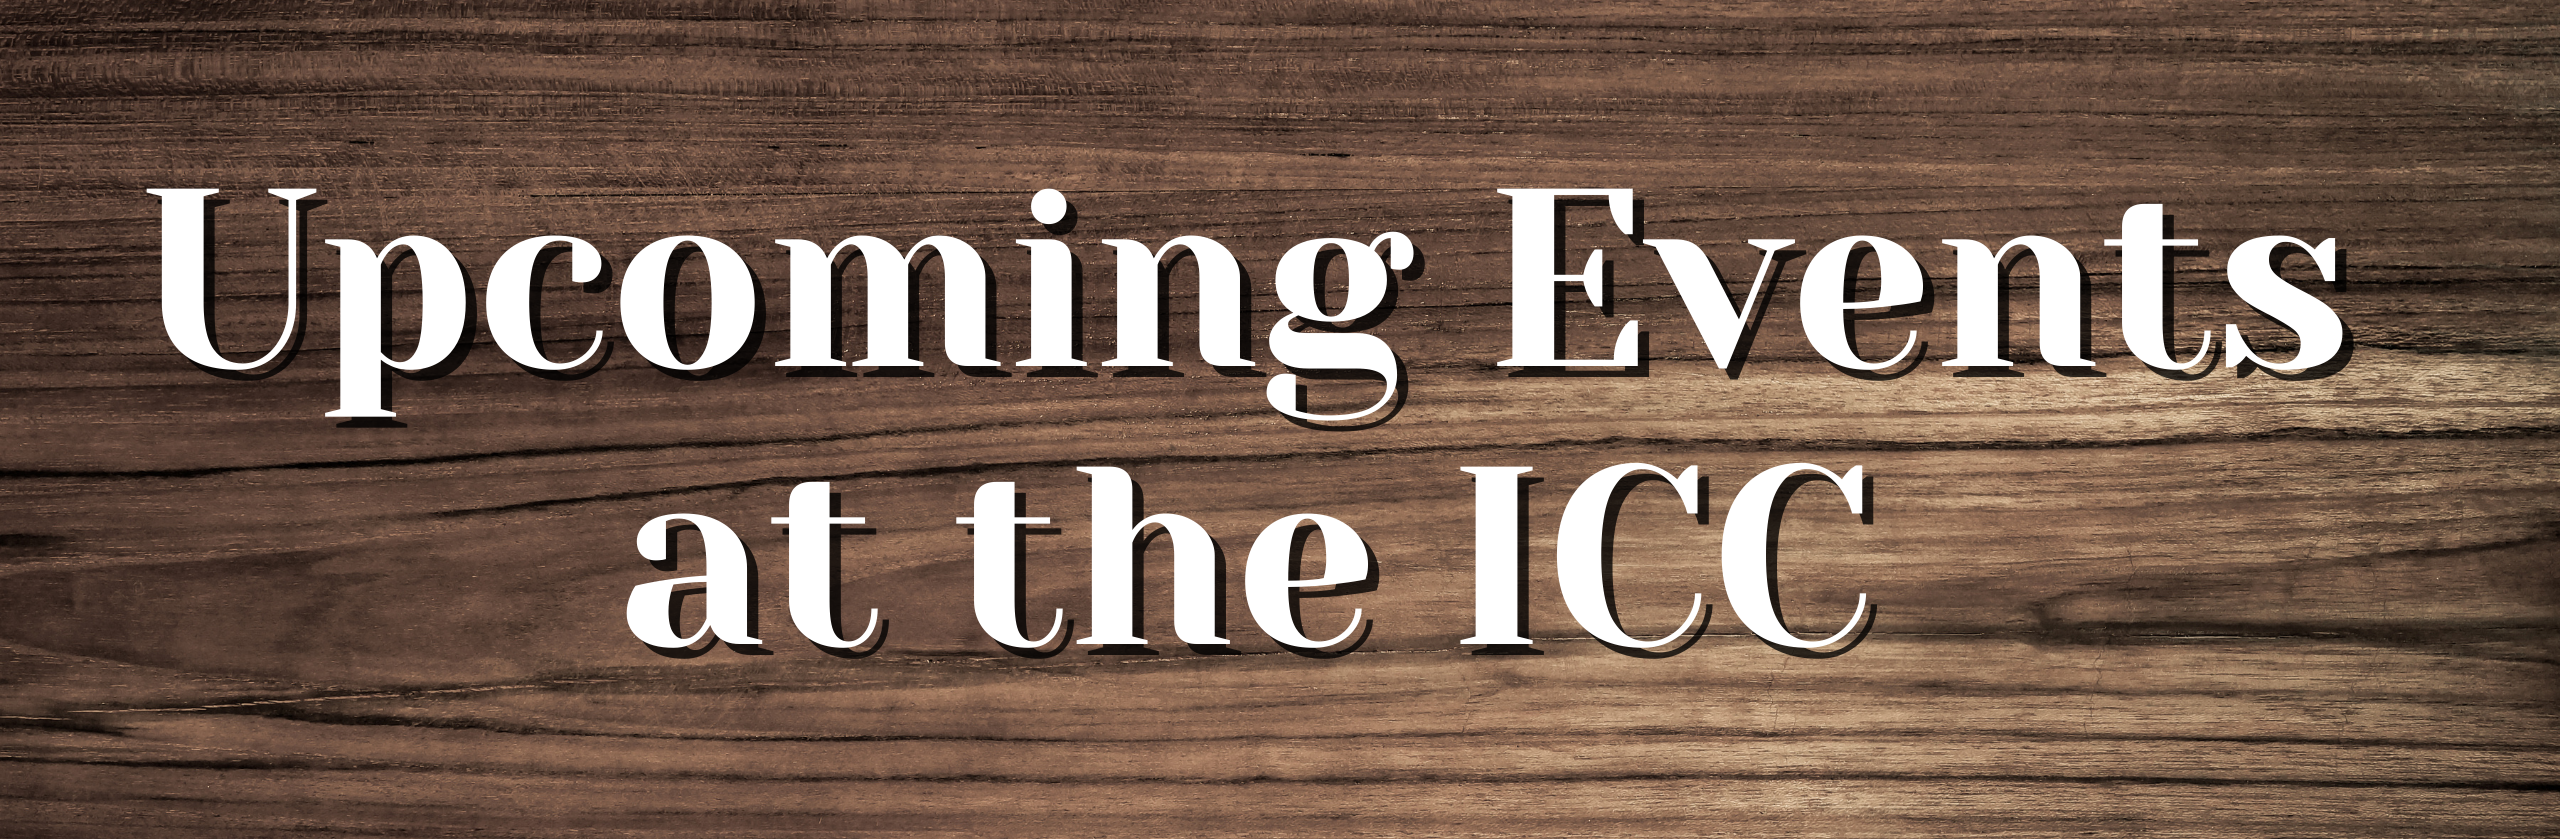 Upcoming Events at the ICC